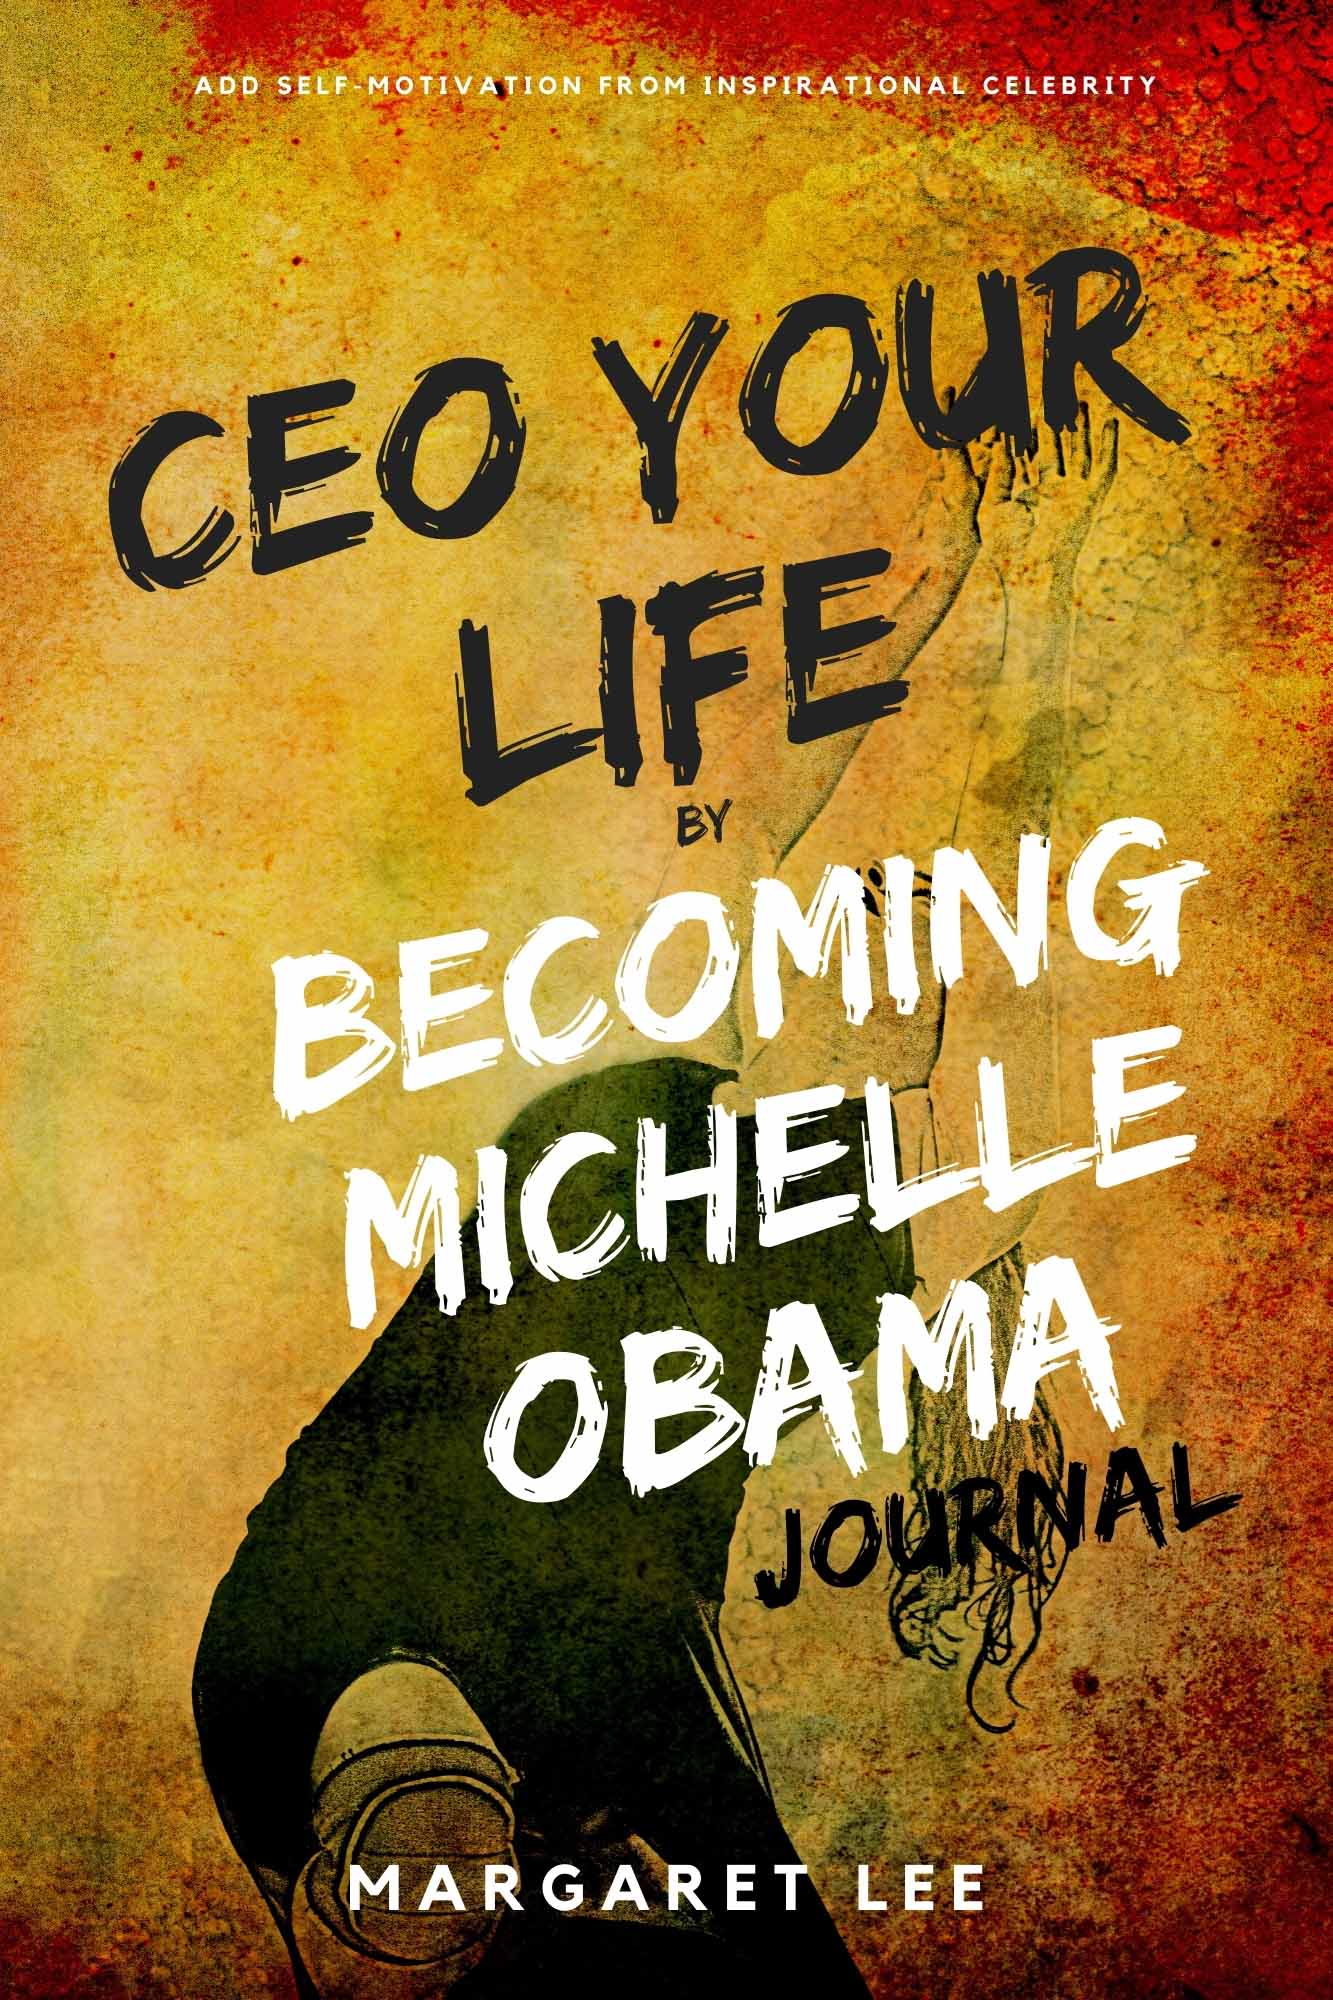 FREE: CEO your life by Becoming Michelle Obama journal: Becoming – A self-motivation from inspirational celebrity -Michelle Obama by Margaret Lee